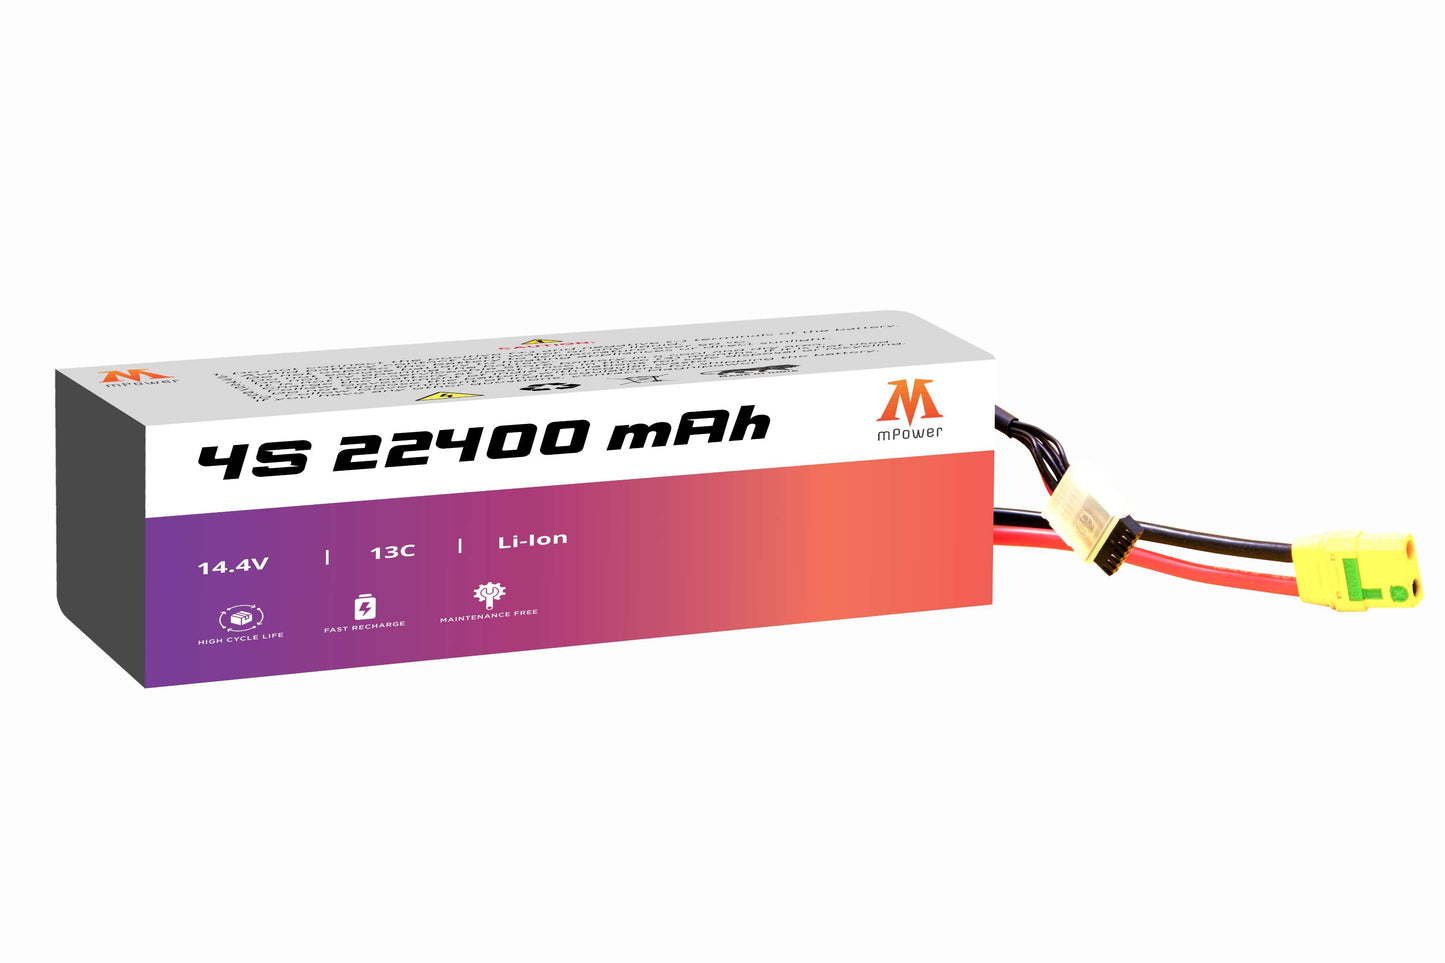 mPower 4S 22400mAh Lithium-Ion Battery for Survey Drones